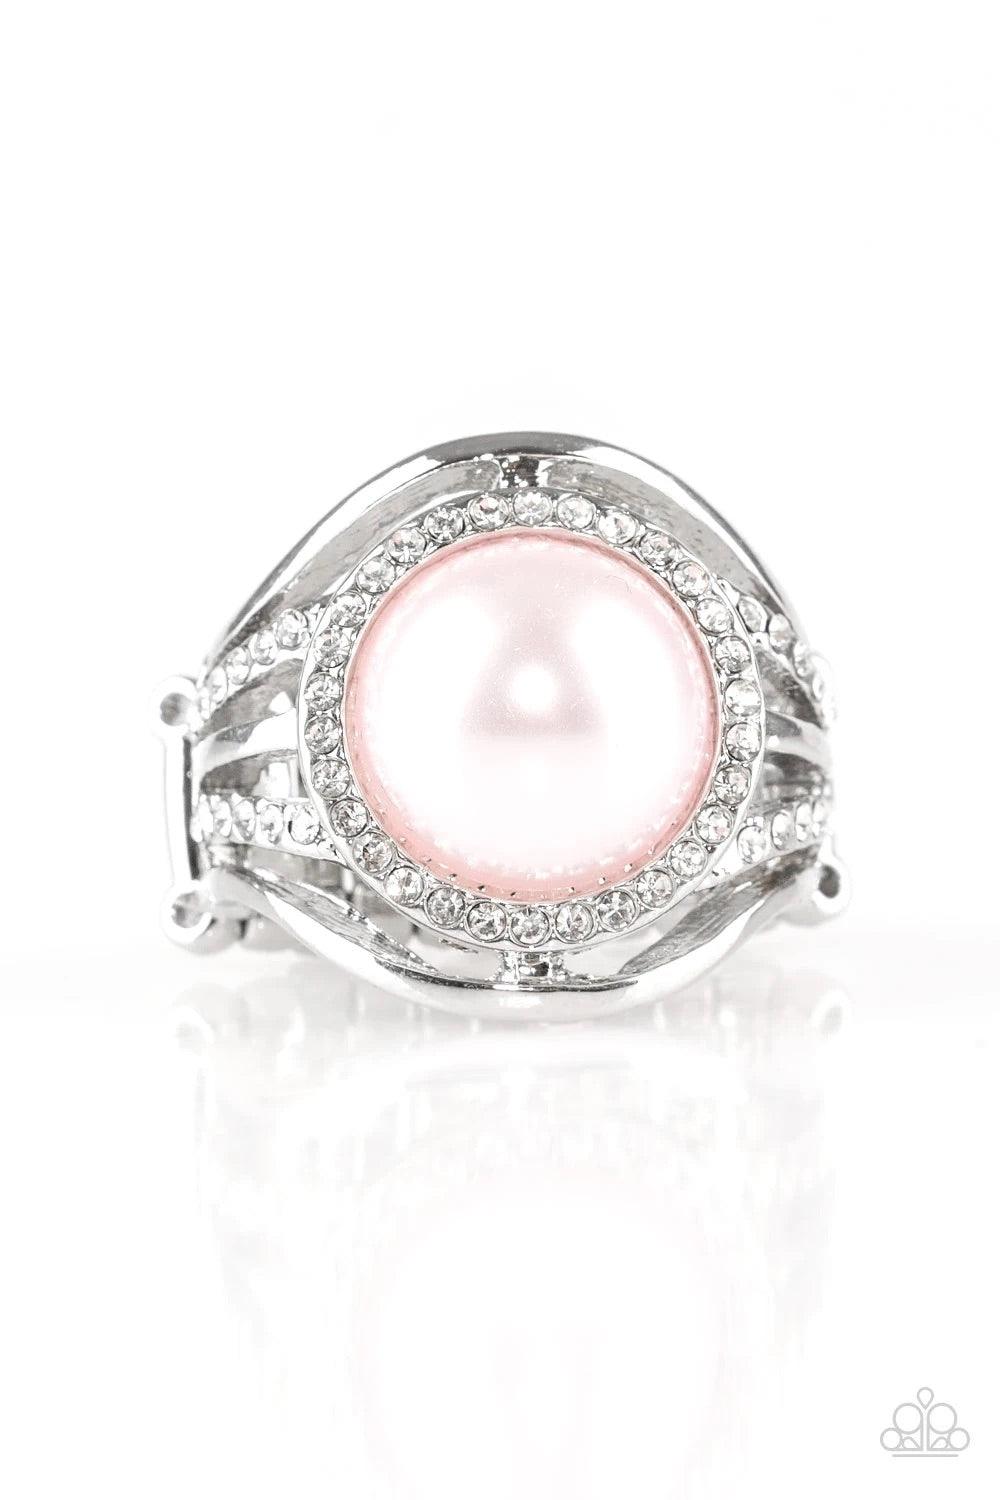 Paparazzi Accessories Pampered in Pearls - Pink Shiny silver bands and white rhinestone encrusted bands flare from a pink pearl drop center for a glamorous look. Features a stretchy band for a flexible fit. Sold as one individual ring. Rings